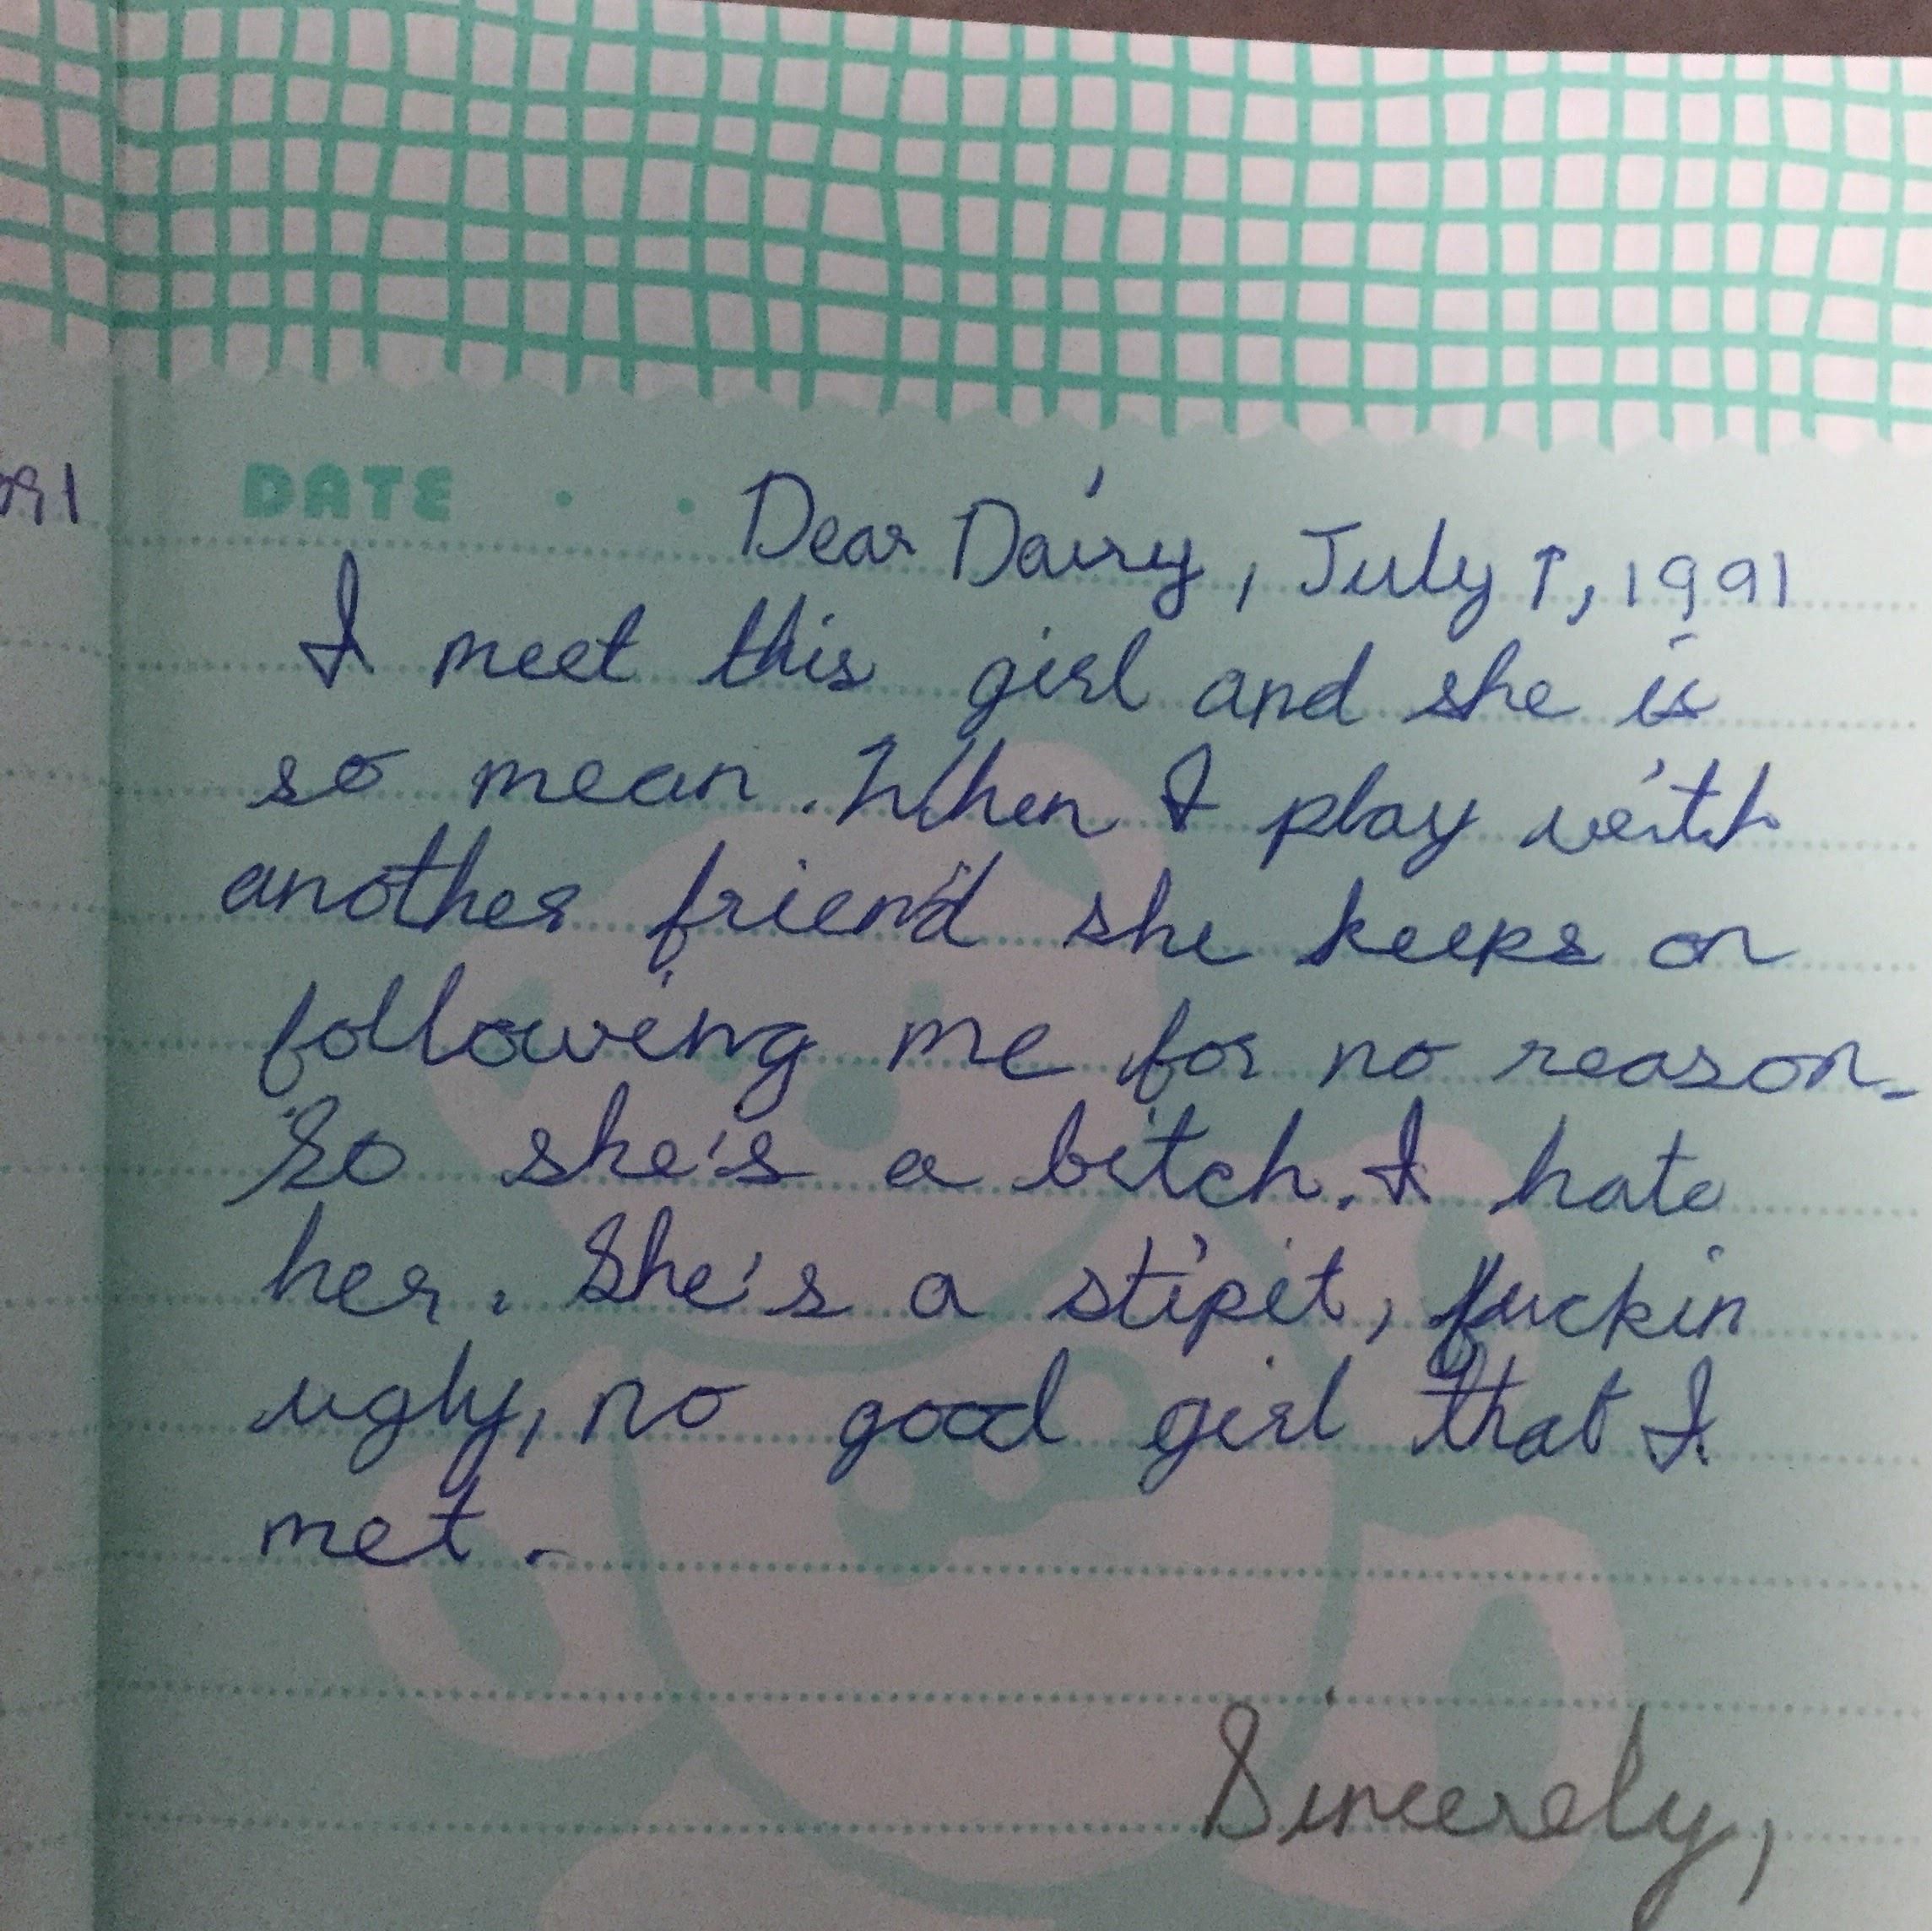 Found my wife’s diary when she was 10